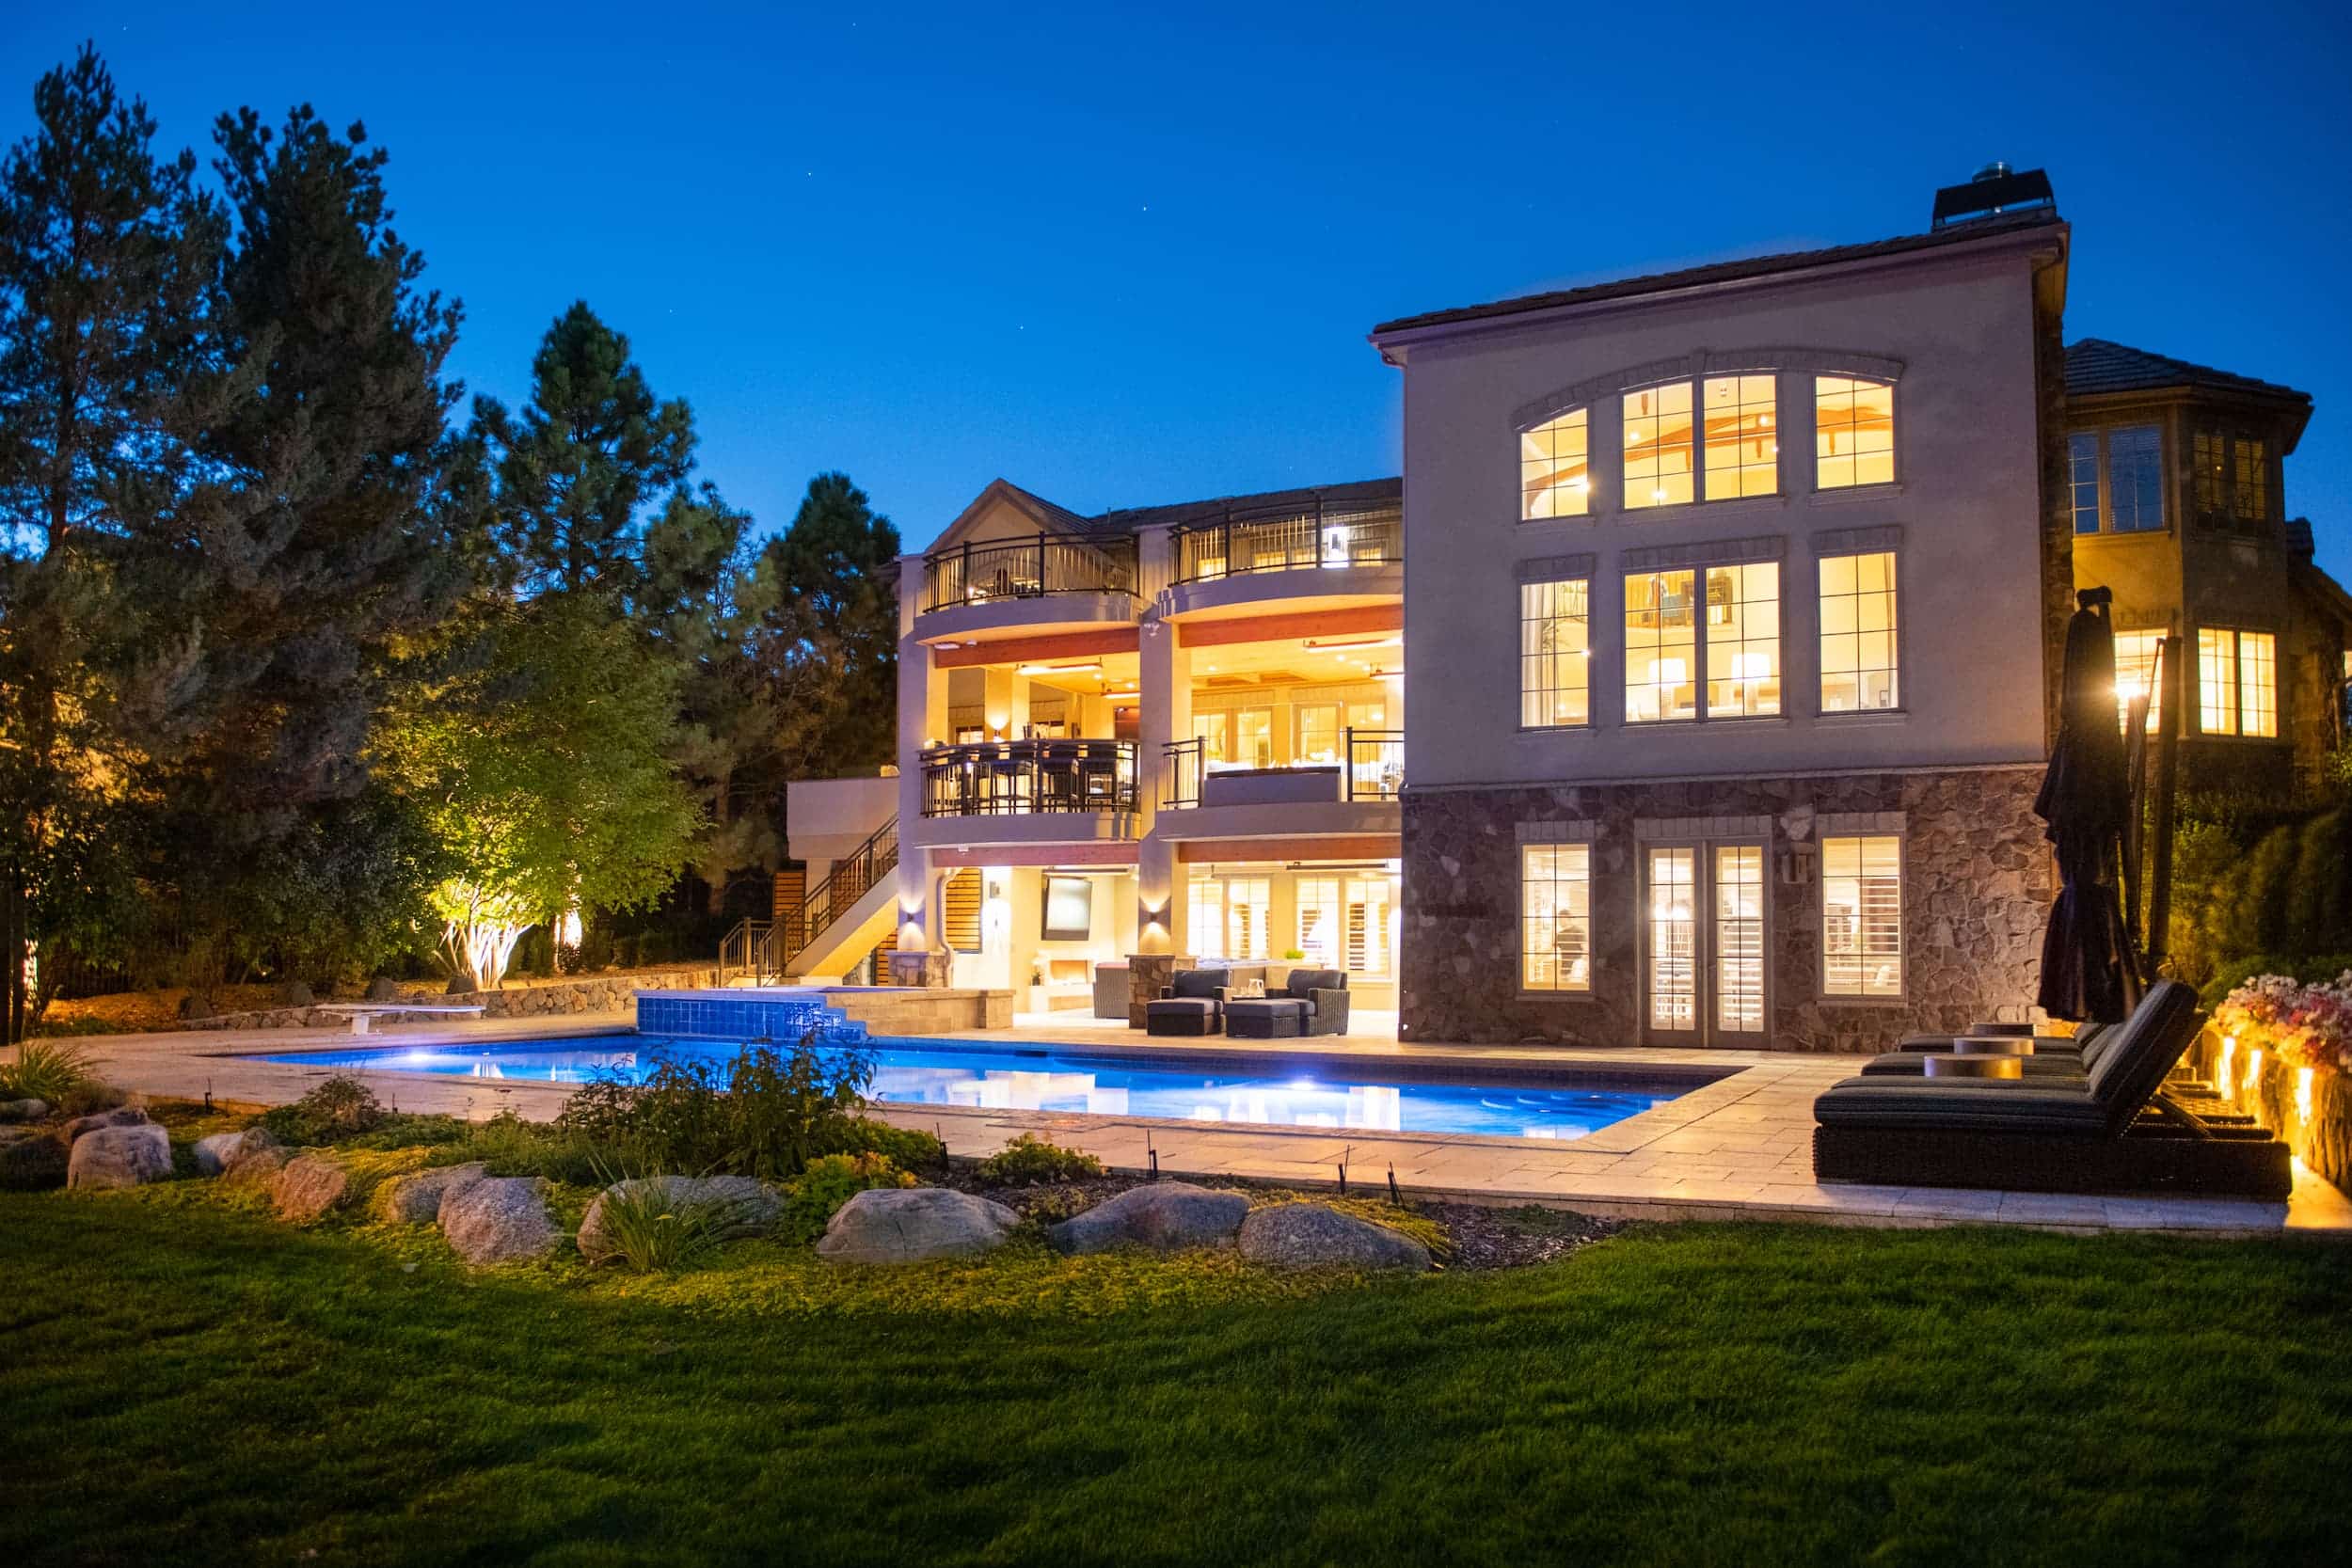 A large home with a pool at night.